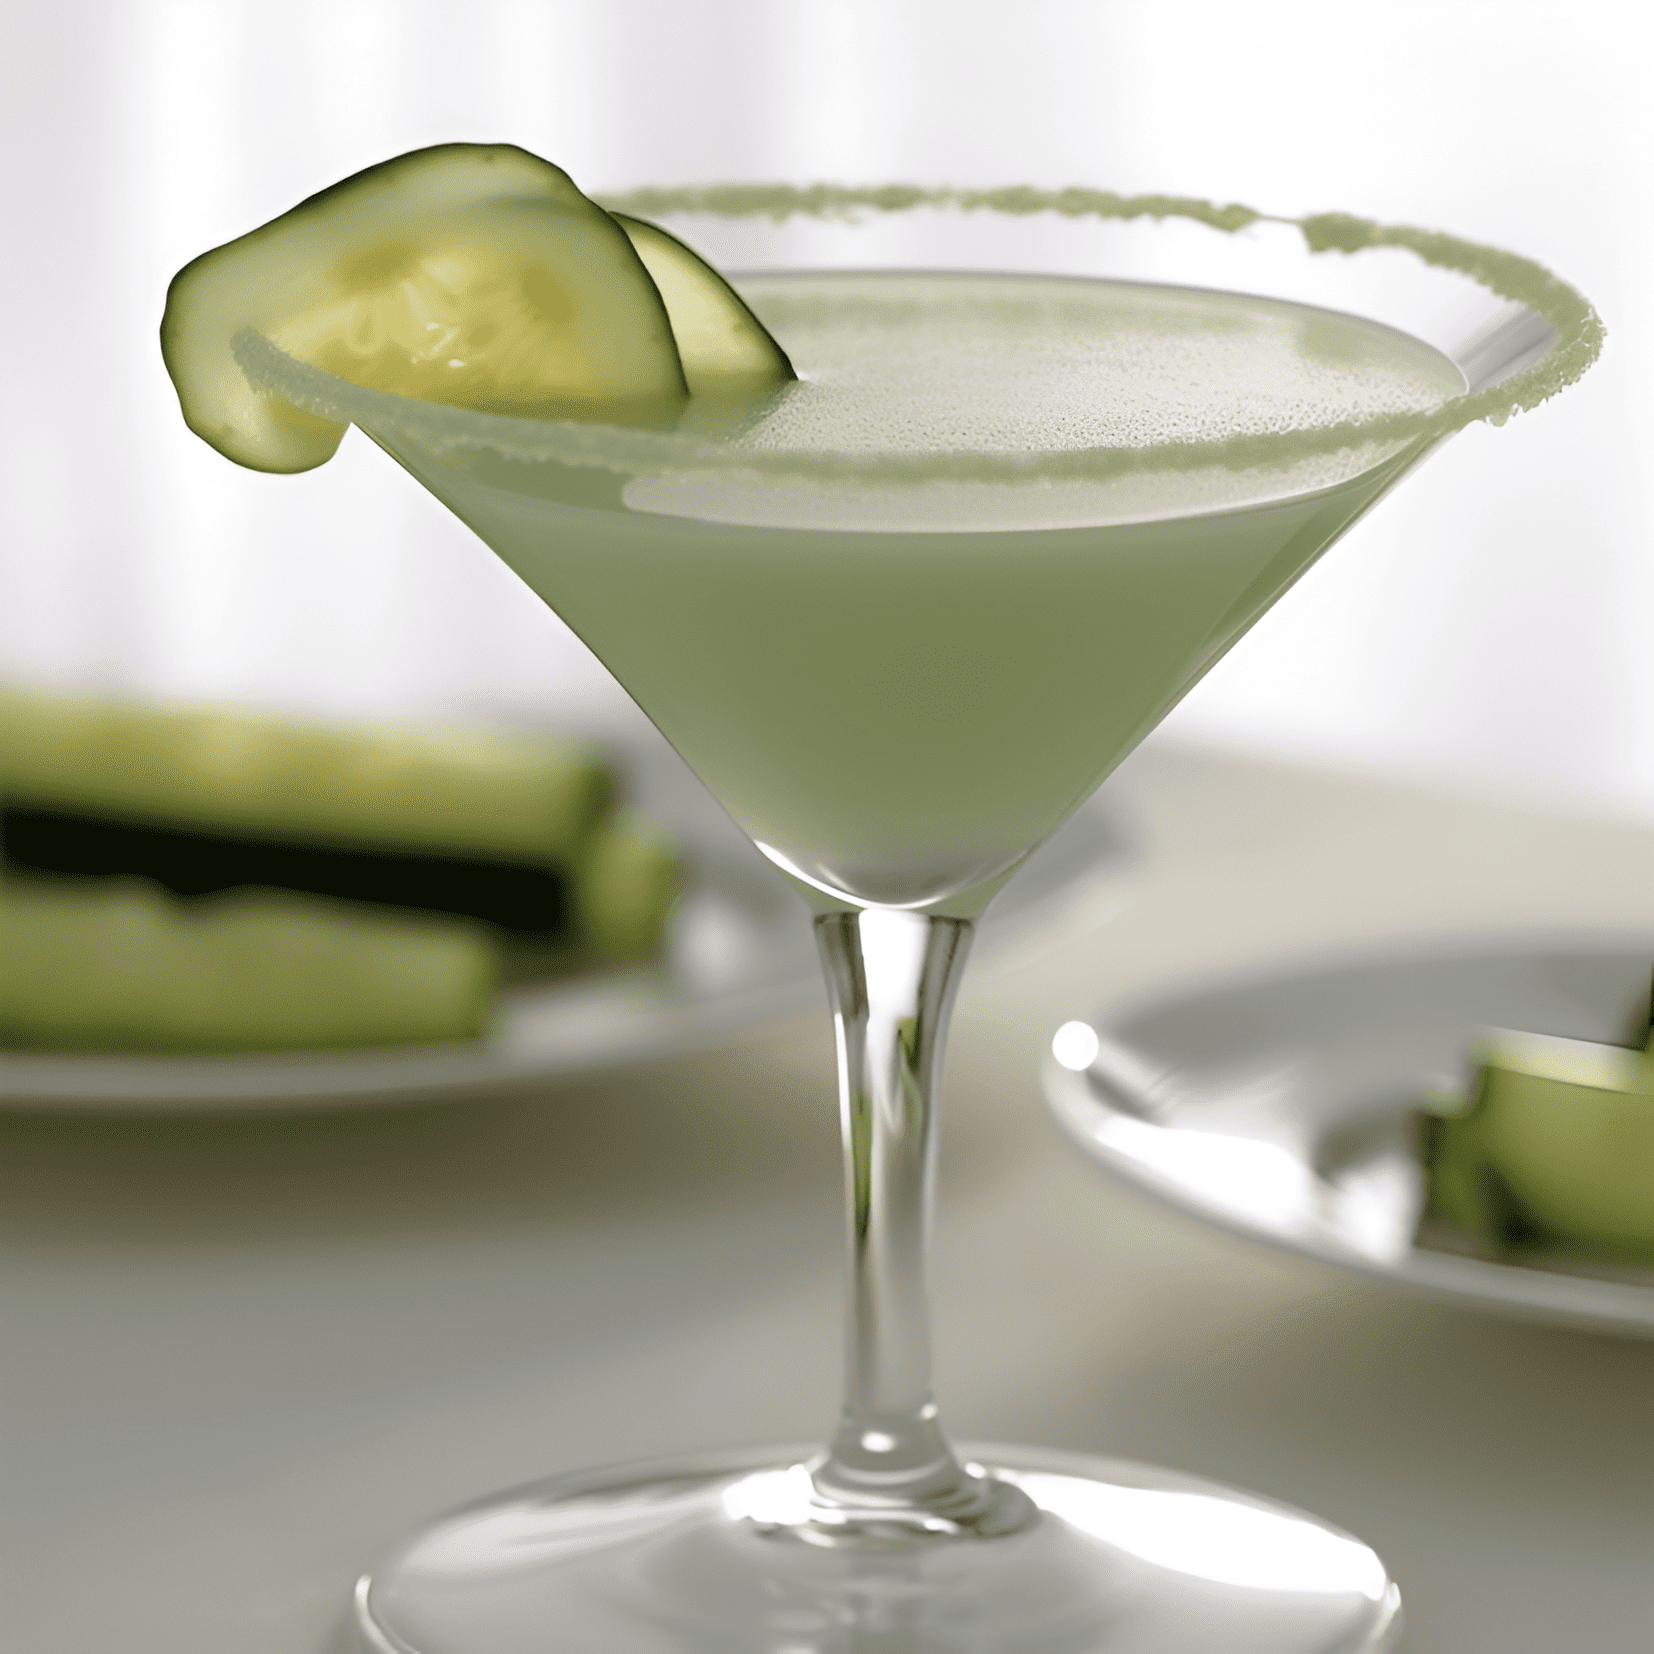 The Cucumber Martini is crisp, clean, and refreshing with a subtle hint of botanicals. It has a light, slightly sweet taste with a smooth, velvety texture. The cucumber adds a cool, fresh flavor that balances the sharpness of the gin and the tanginess of the lemon.